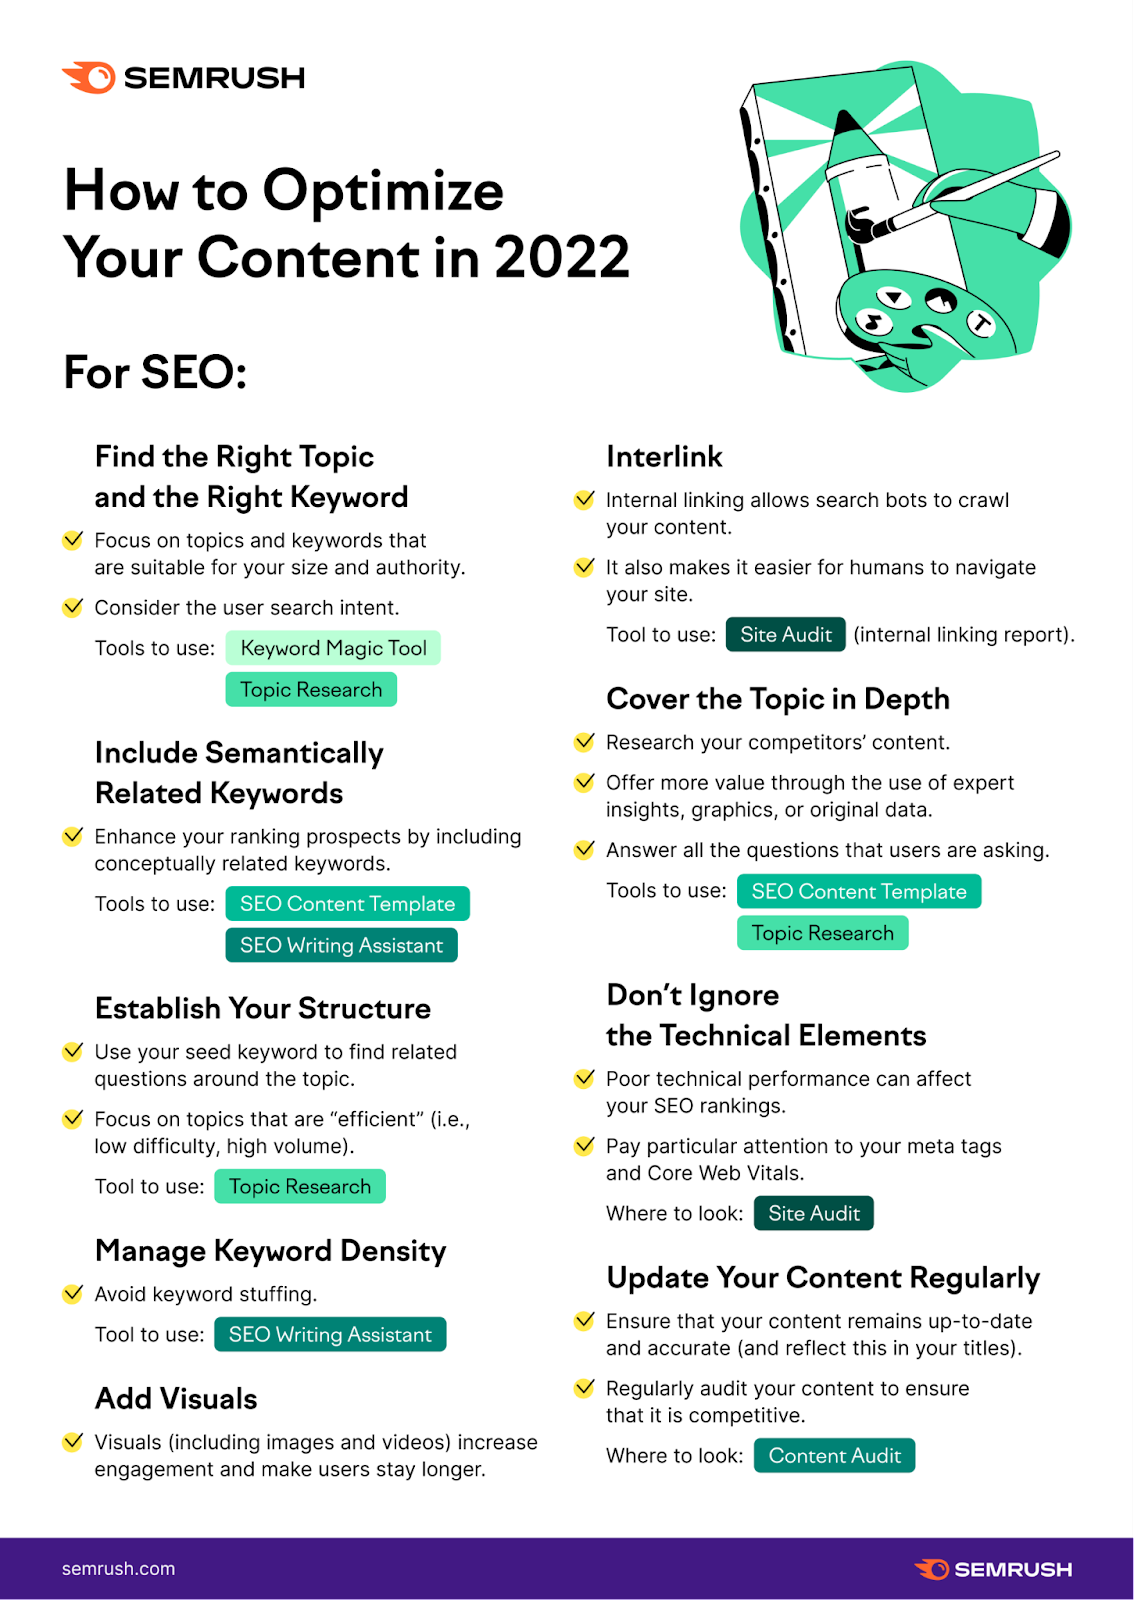 an infographic on "How to optimize your content"